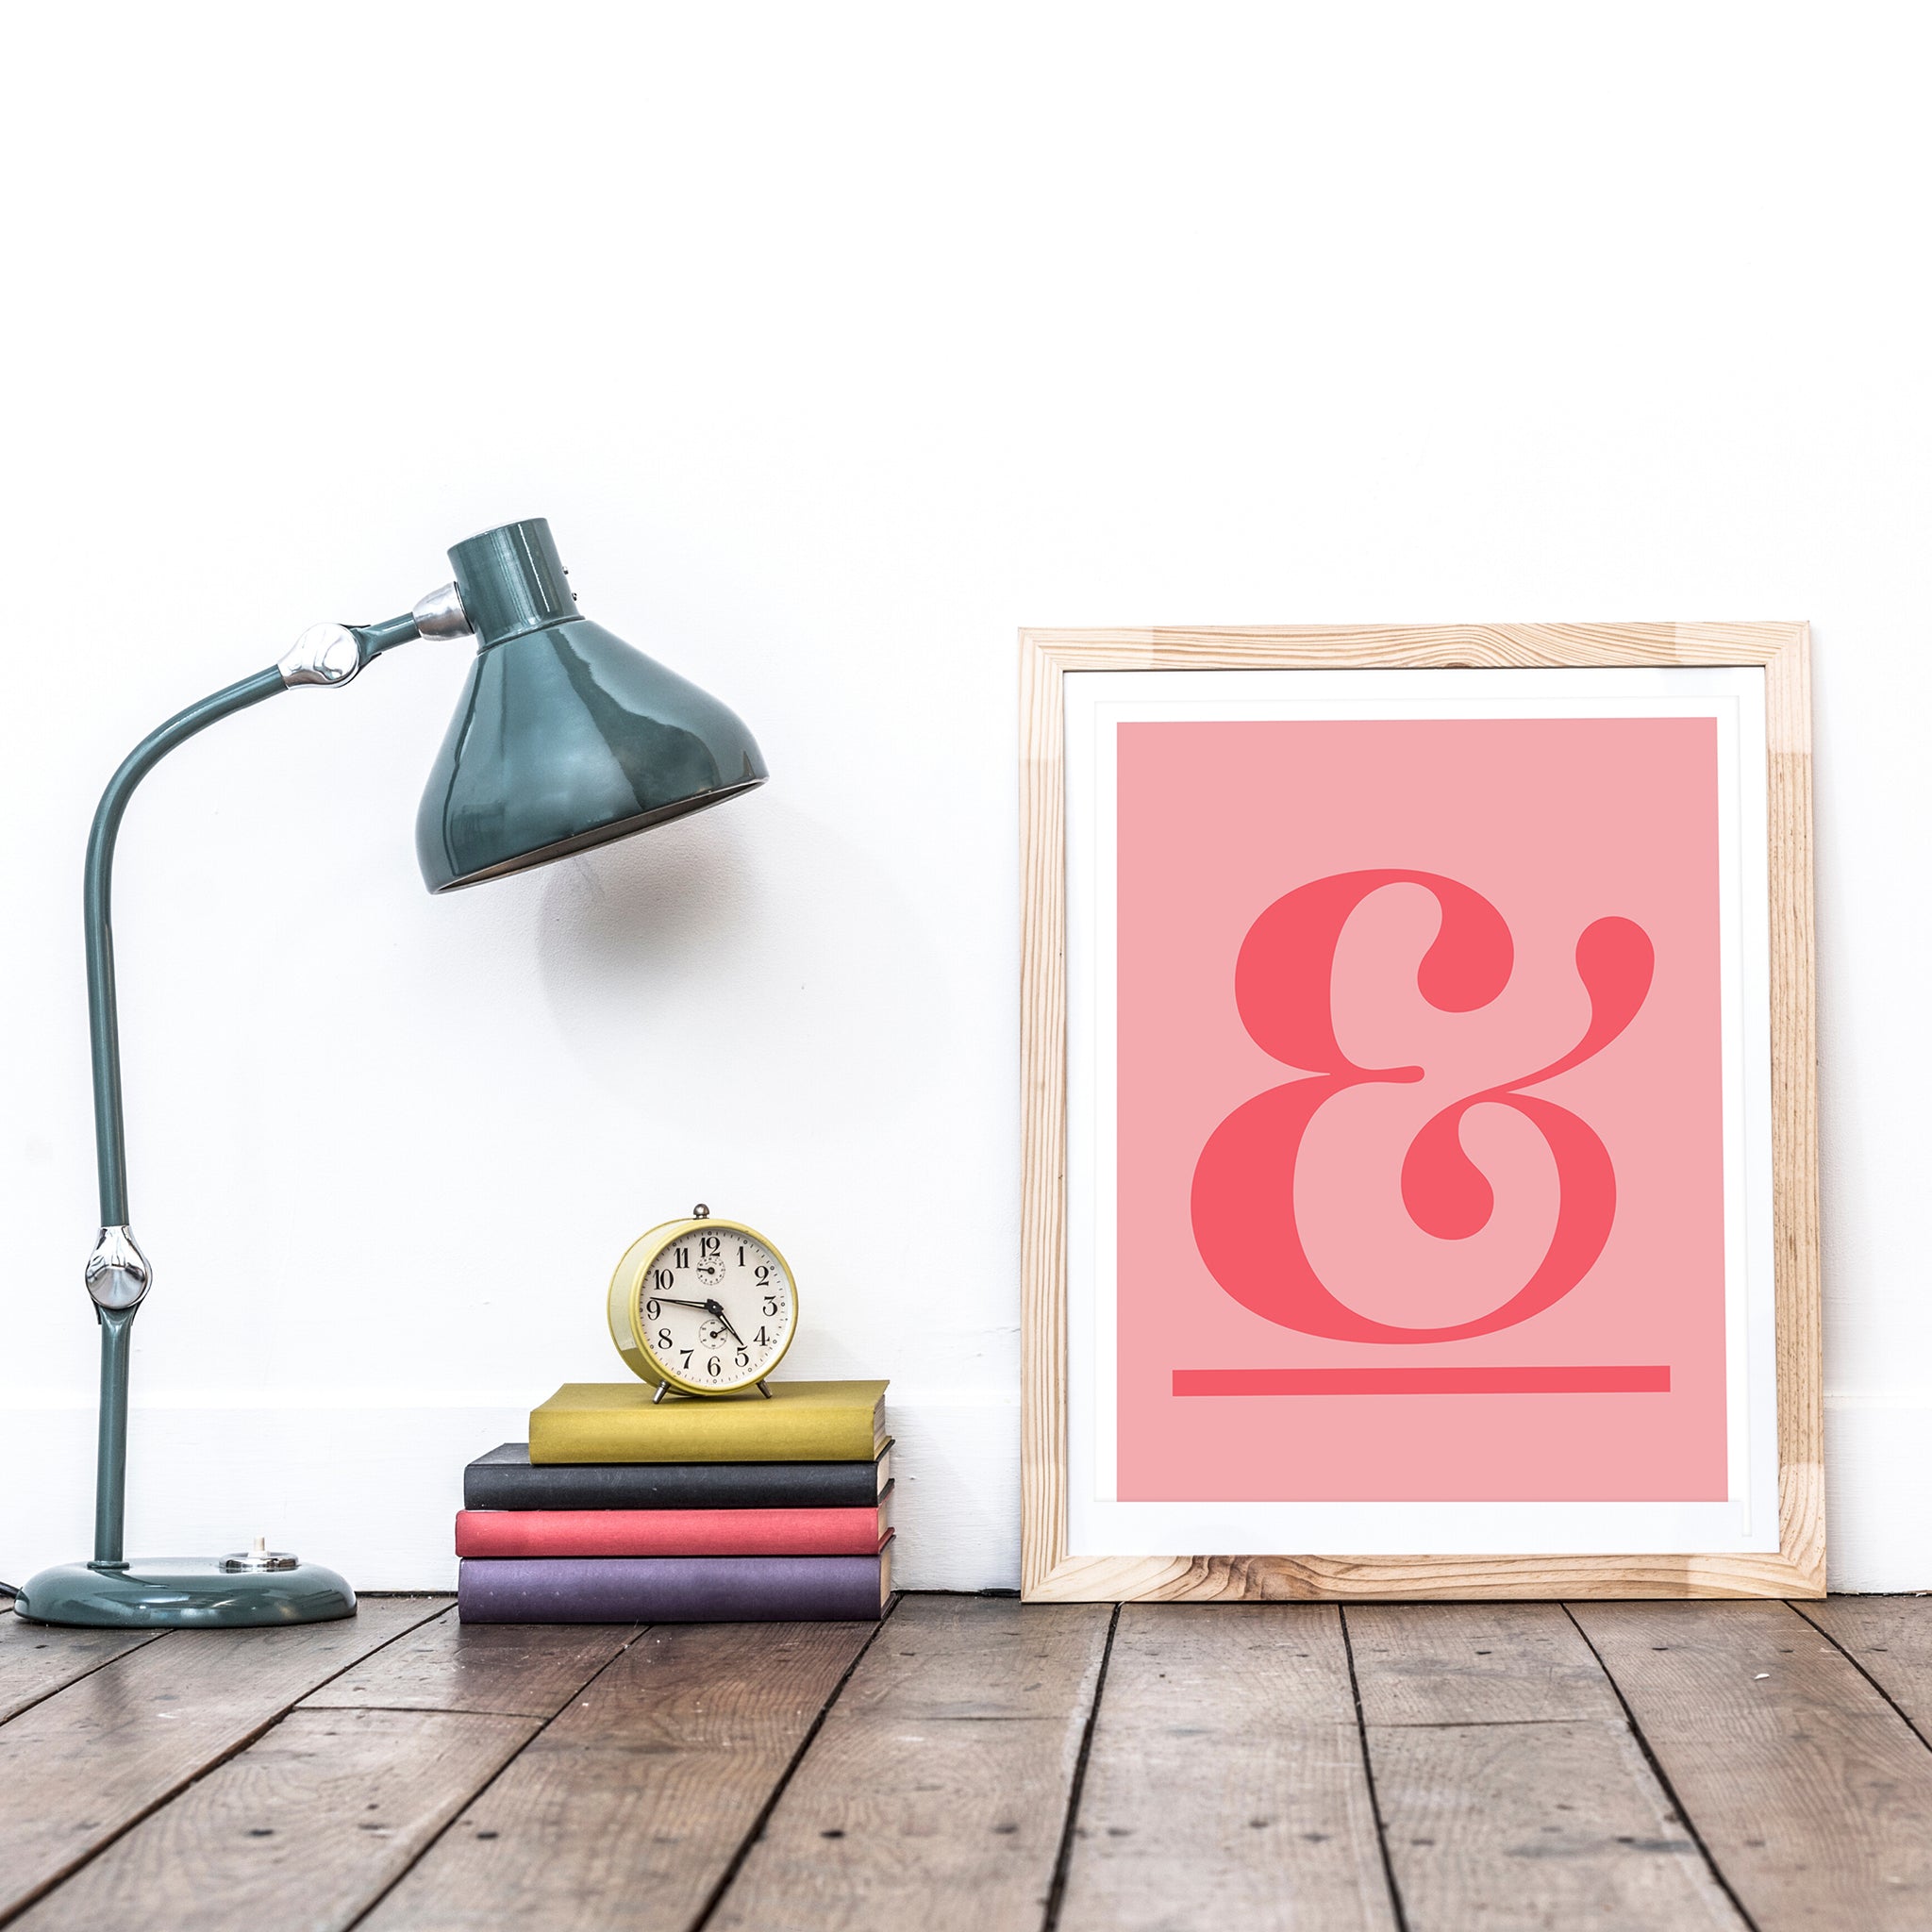 Ampersand Art Print (coral on pink)